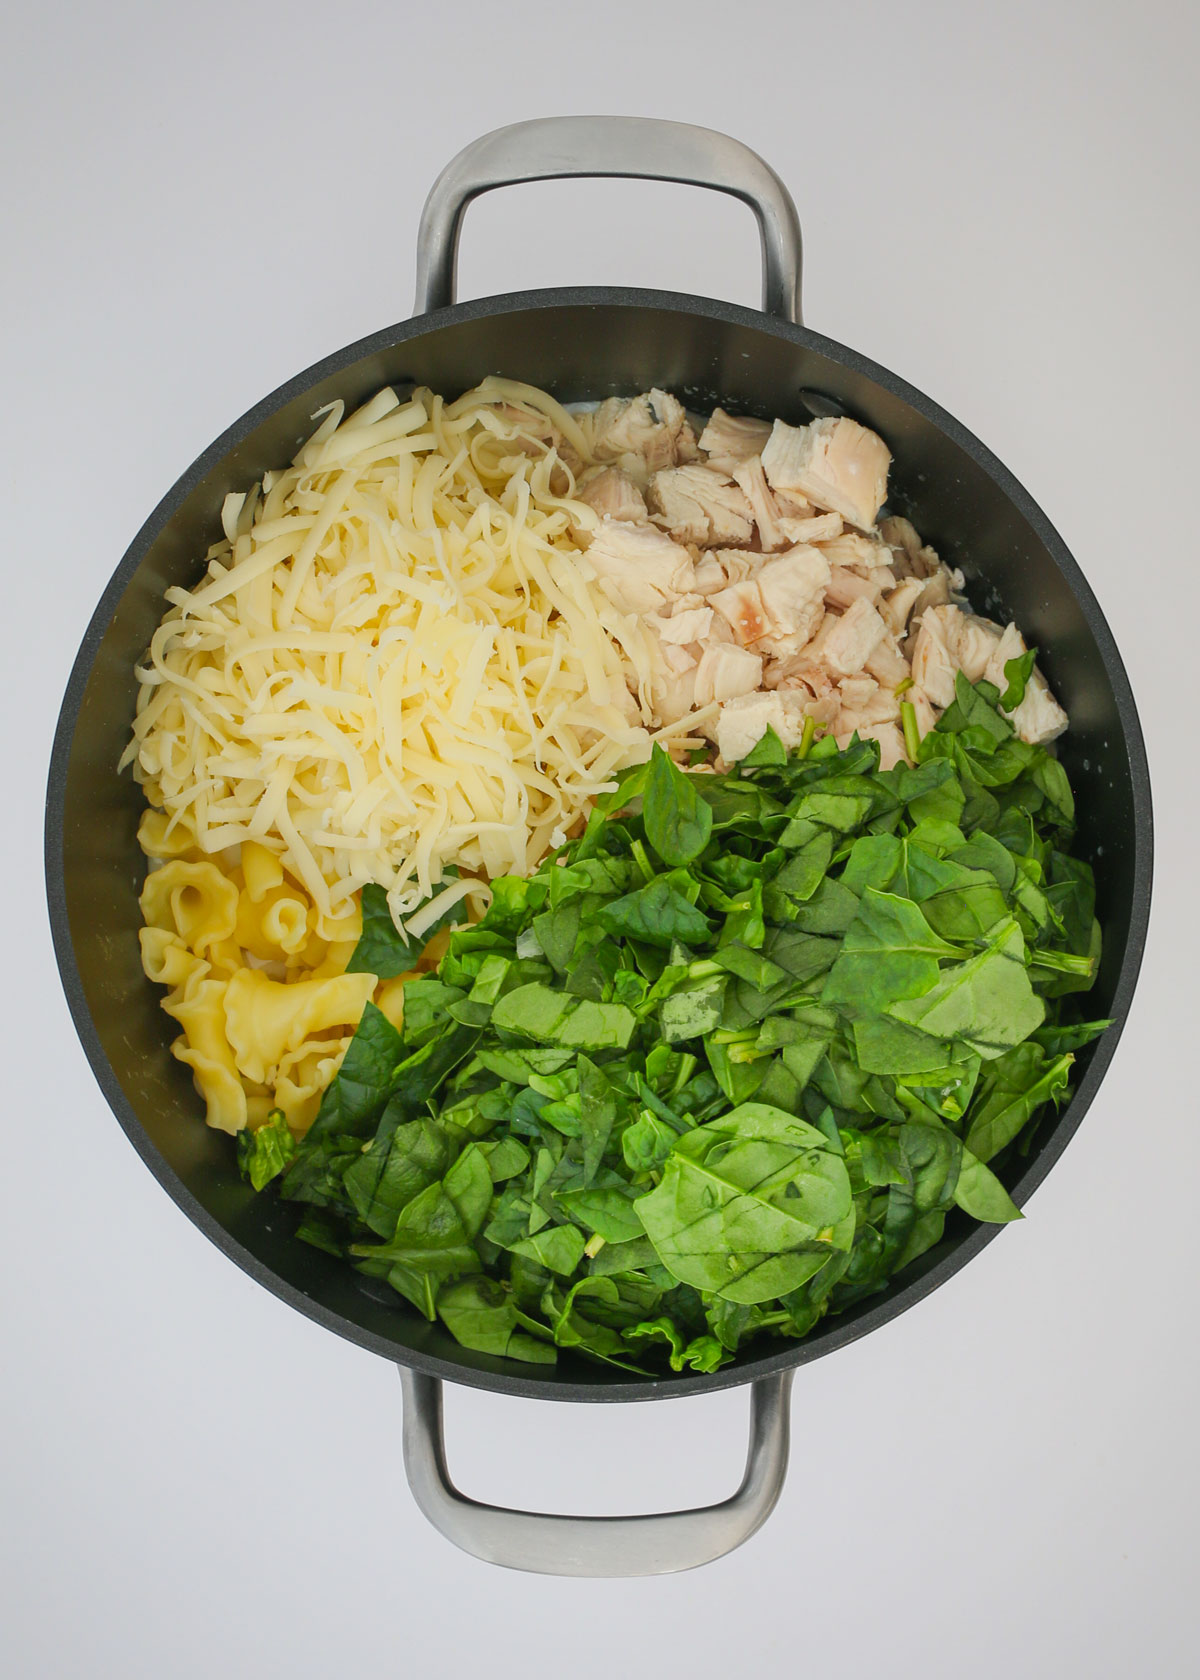 adding chicken, cheese, pasta, and spinach to the sauce in the pot.